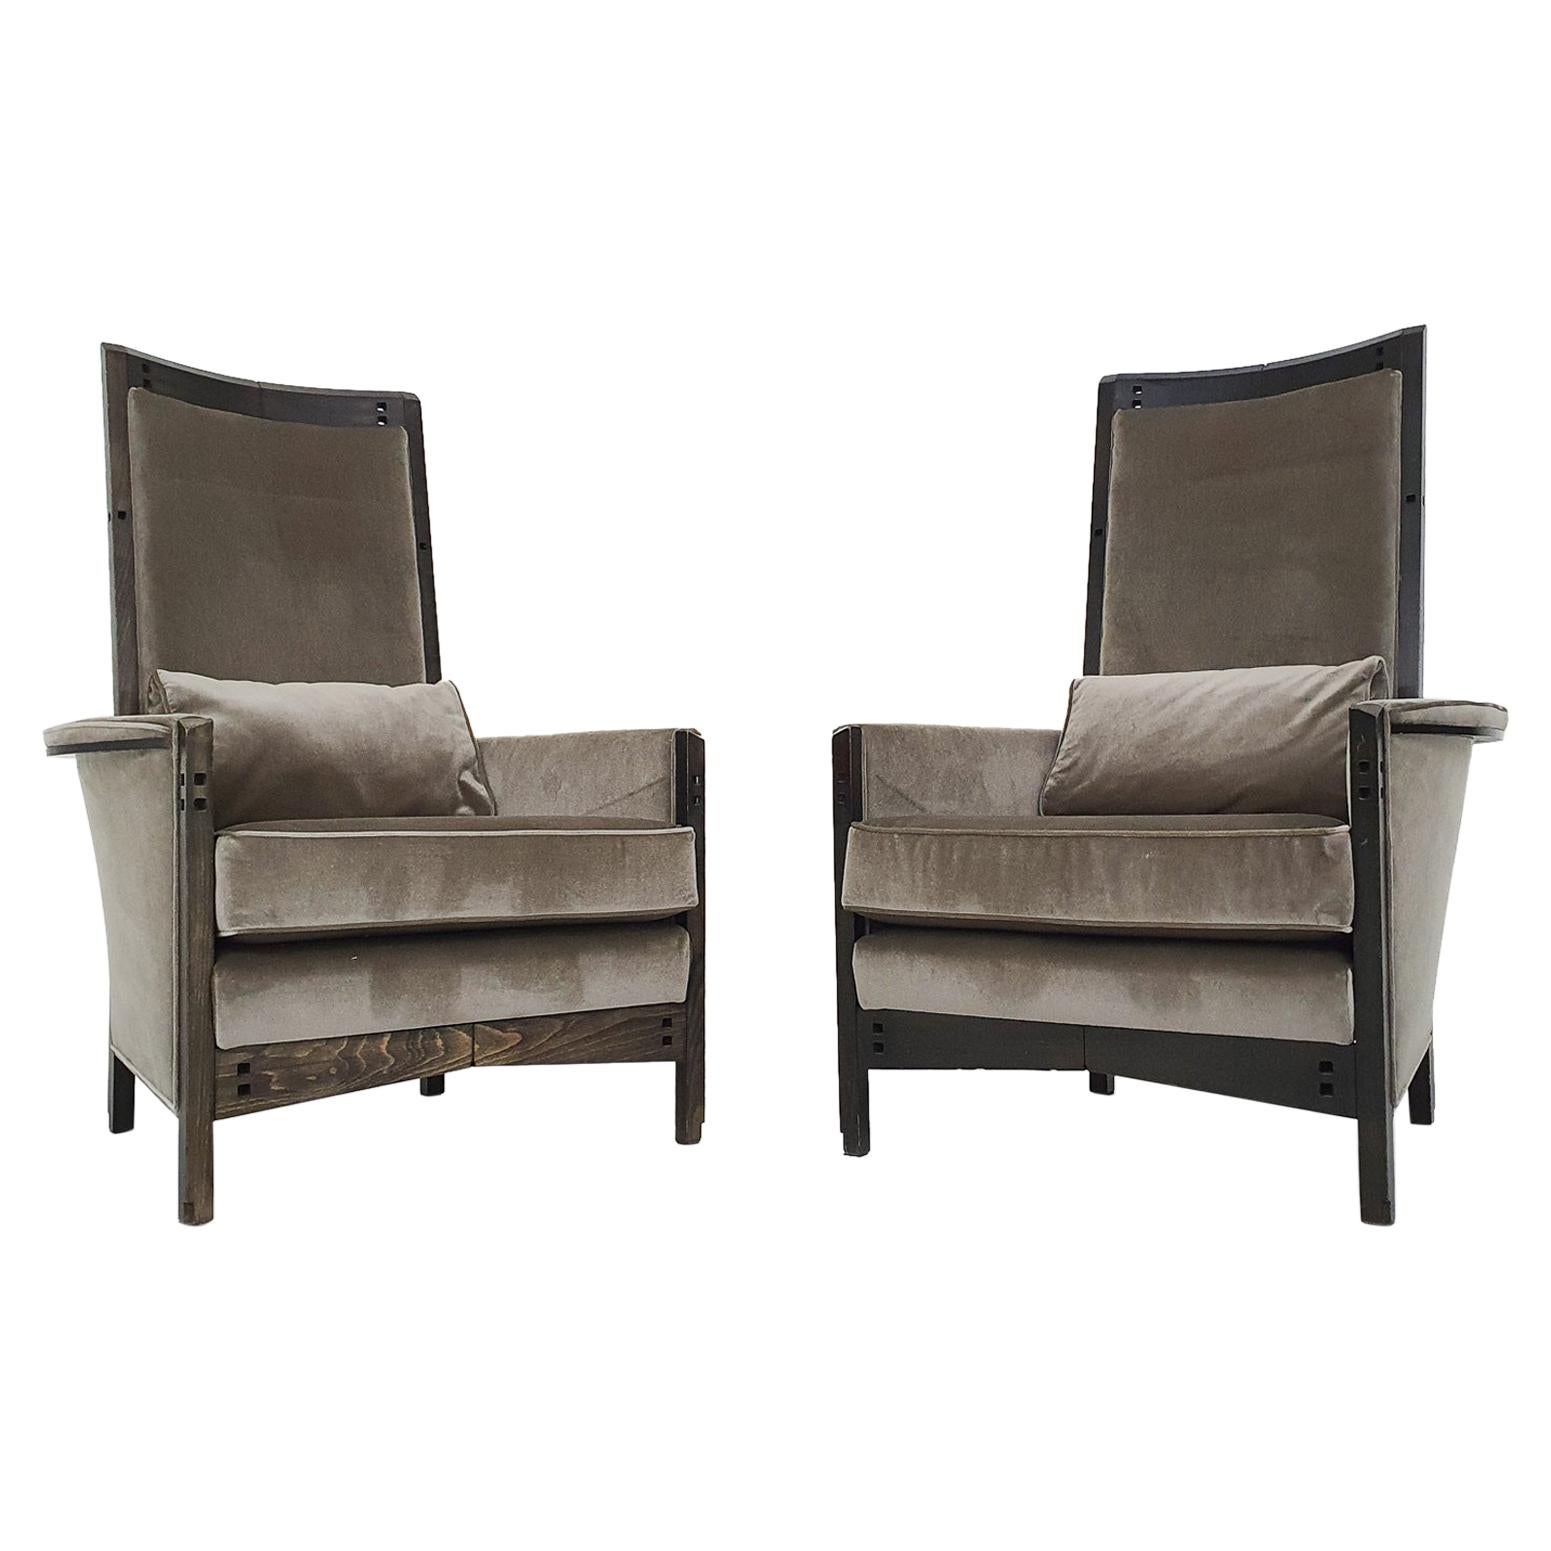 Umberto Asnago for Giorgetti "Peggy 63970" Lounge Chairs, Set of 2, Italy 1990